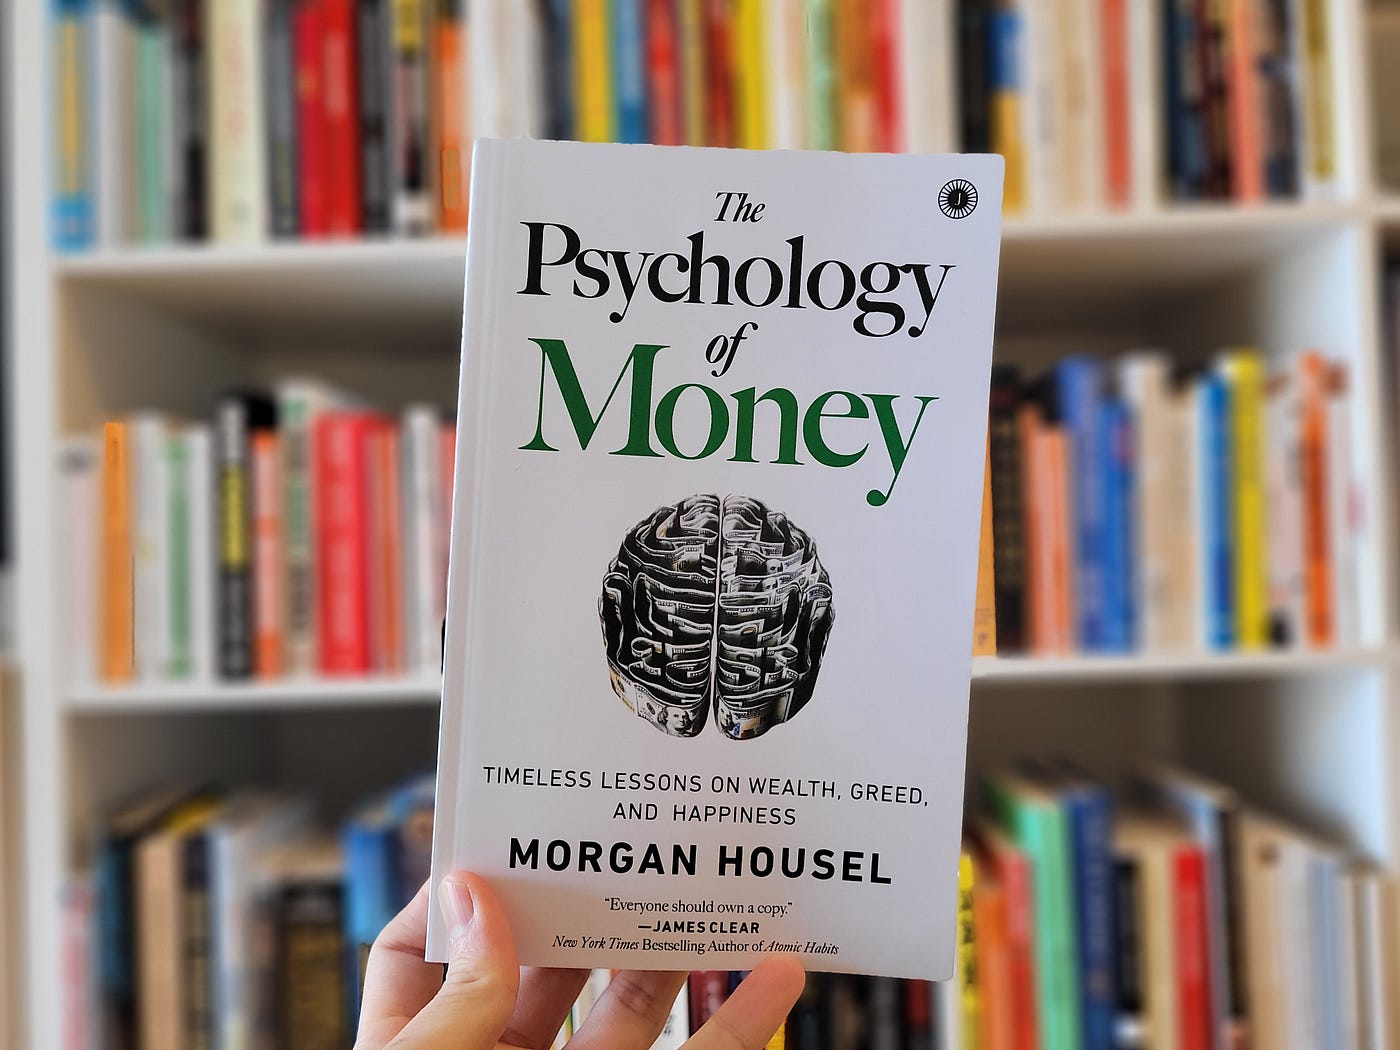 Book Review #19: 'THE PSYCHOLOGY OF MONEY' by Morgan Housel, by Sneha  Arora